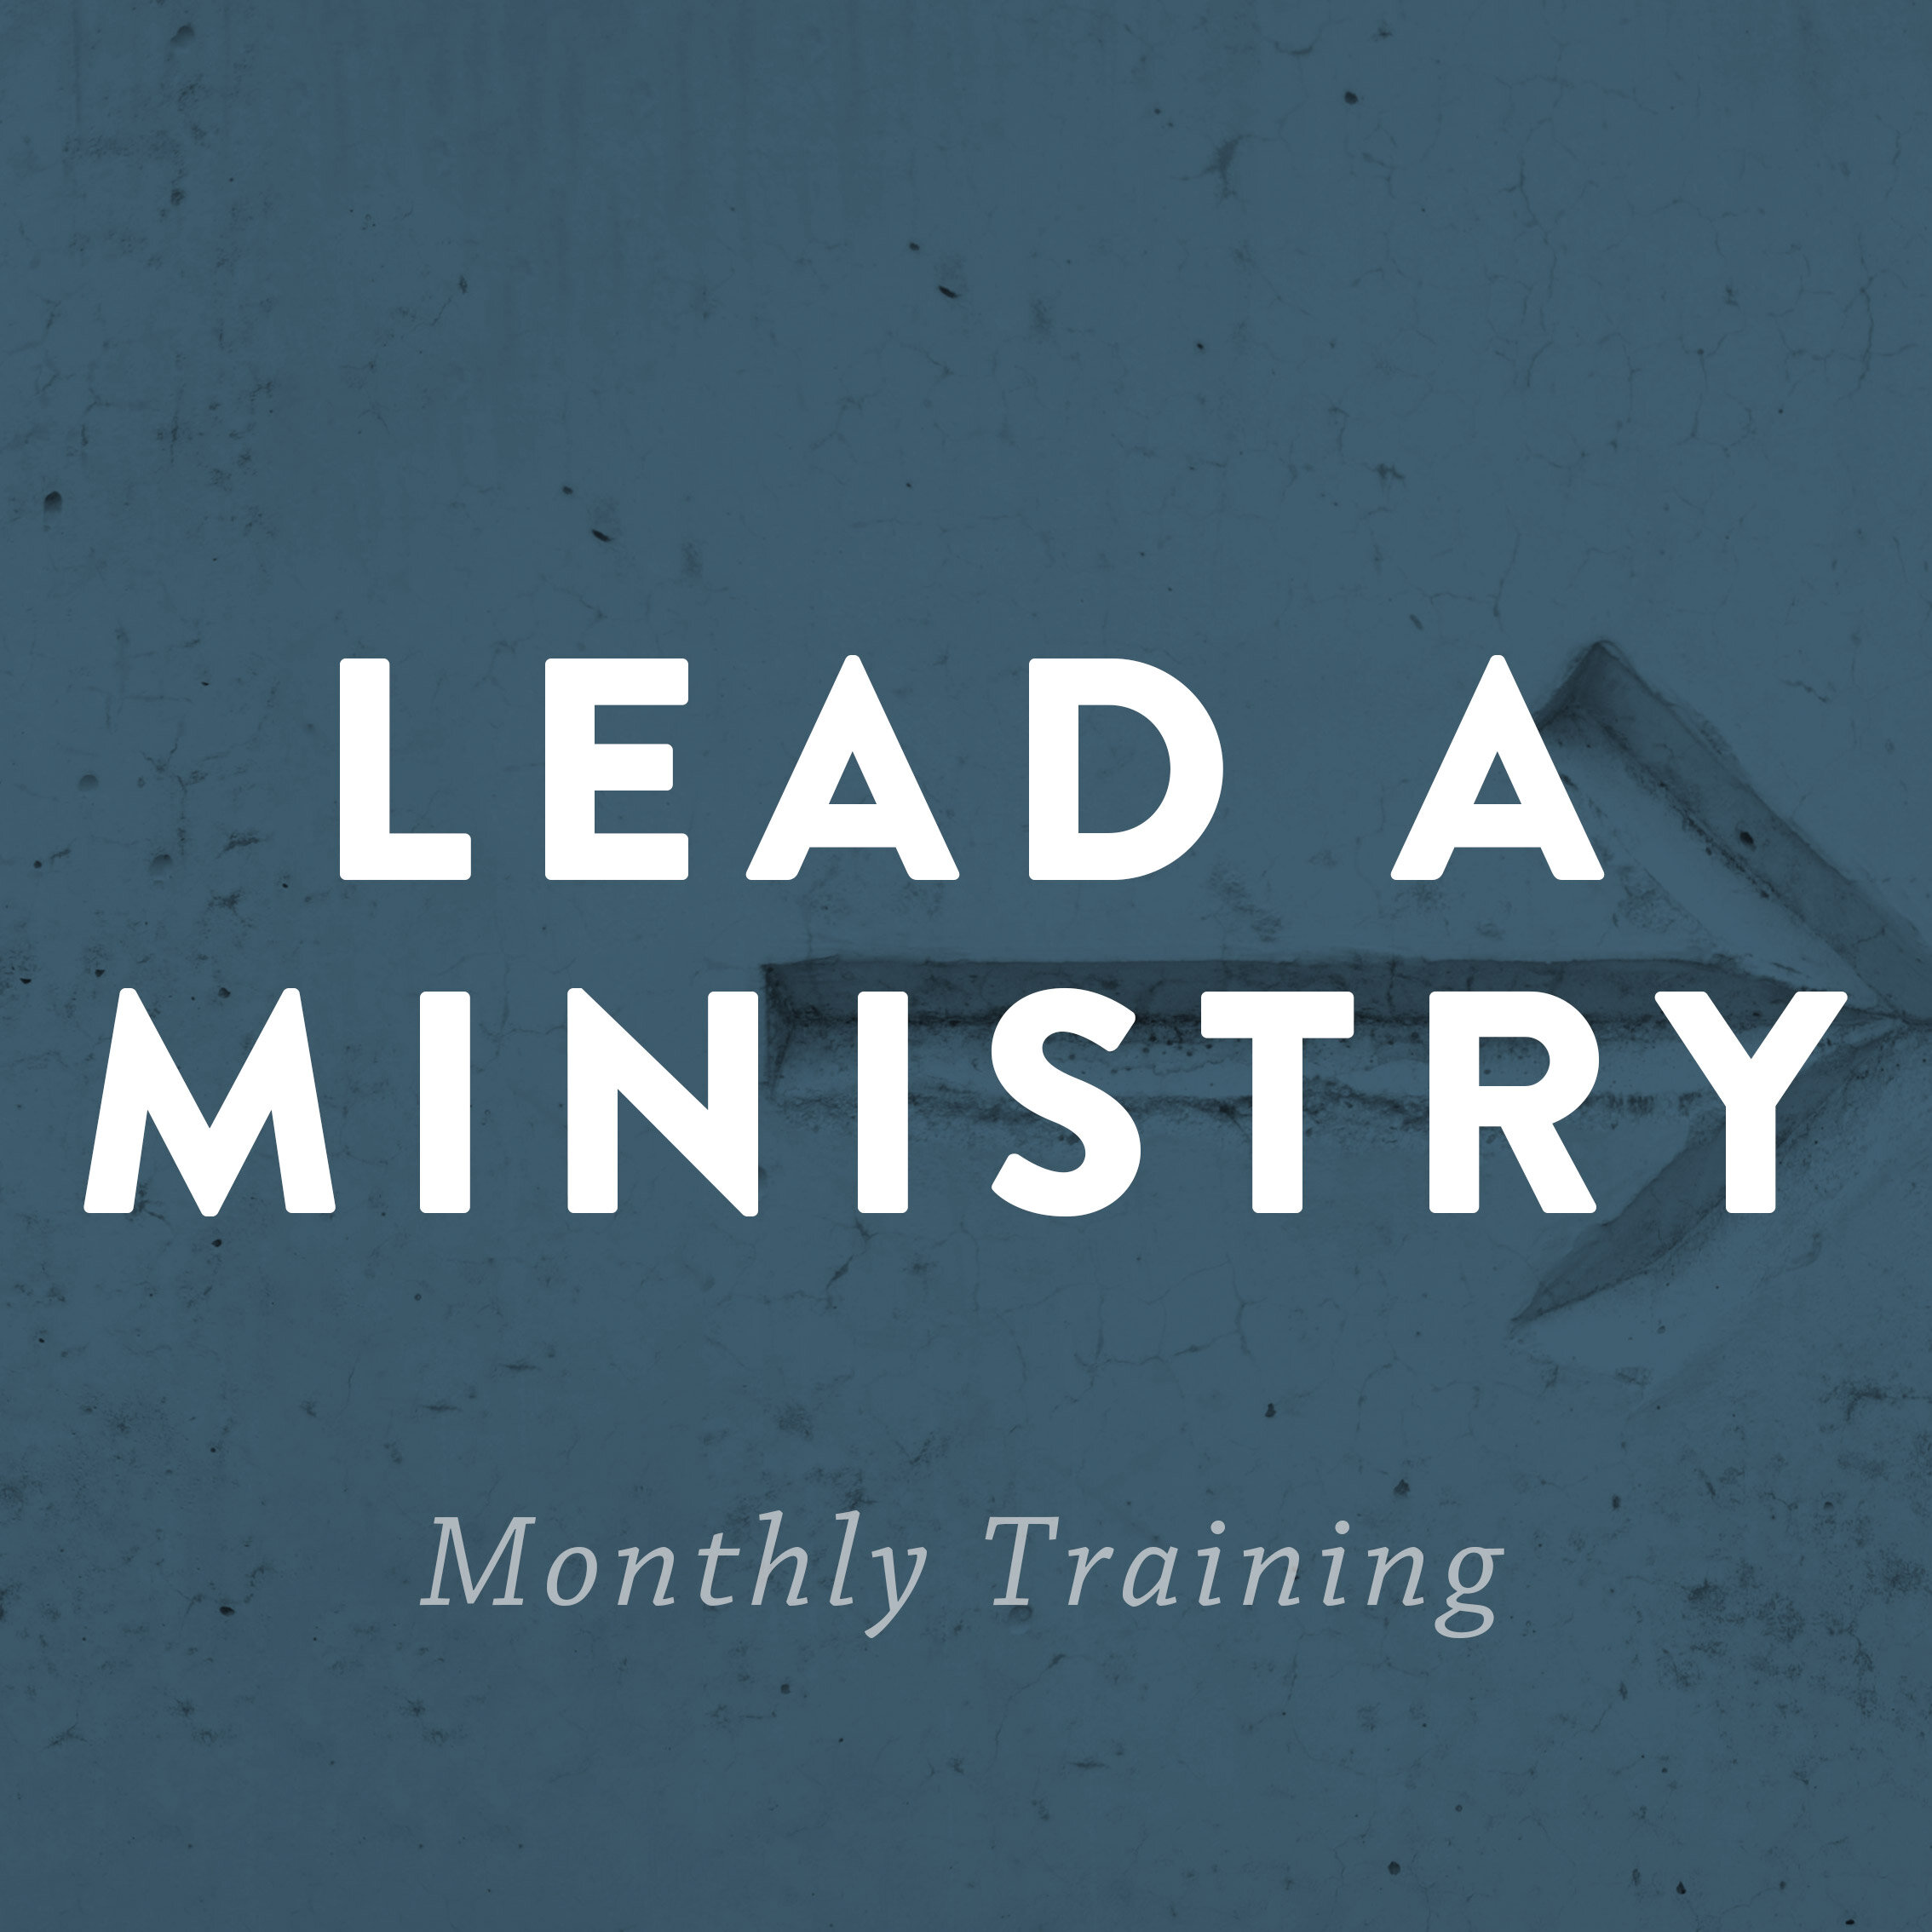 Lead a ministry (Copy)